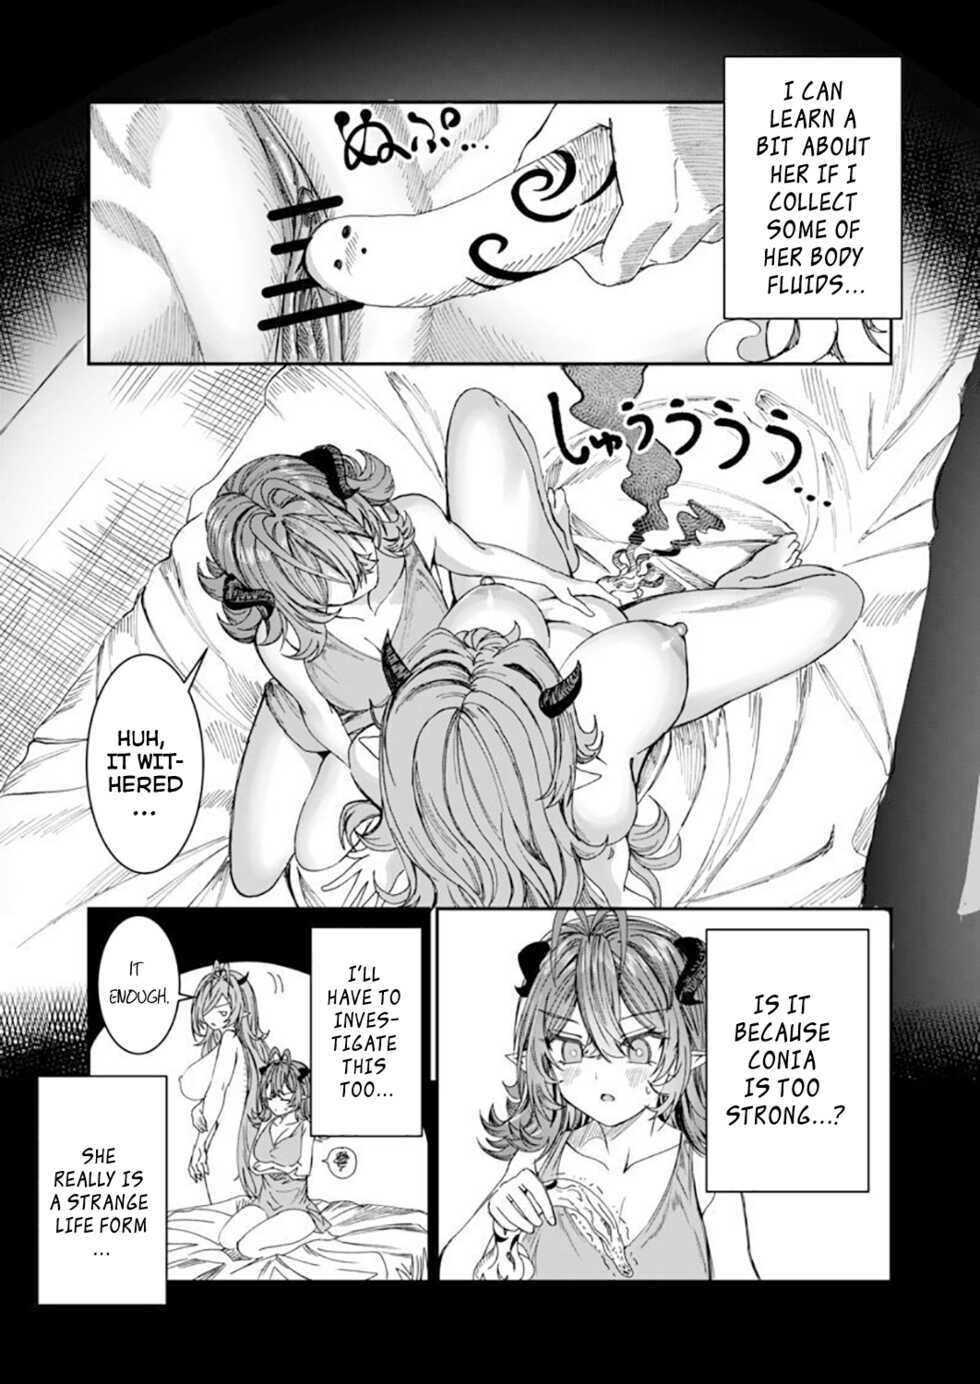 [Alde Hyde] Dorei wo Choukyoushite Harem Tsukuru R18 Route - Training Slaves to make a Harem 18+ Chapters 12.5-25.5 + Valentine's Special [English] - Page 39